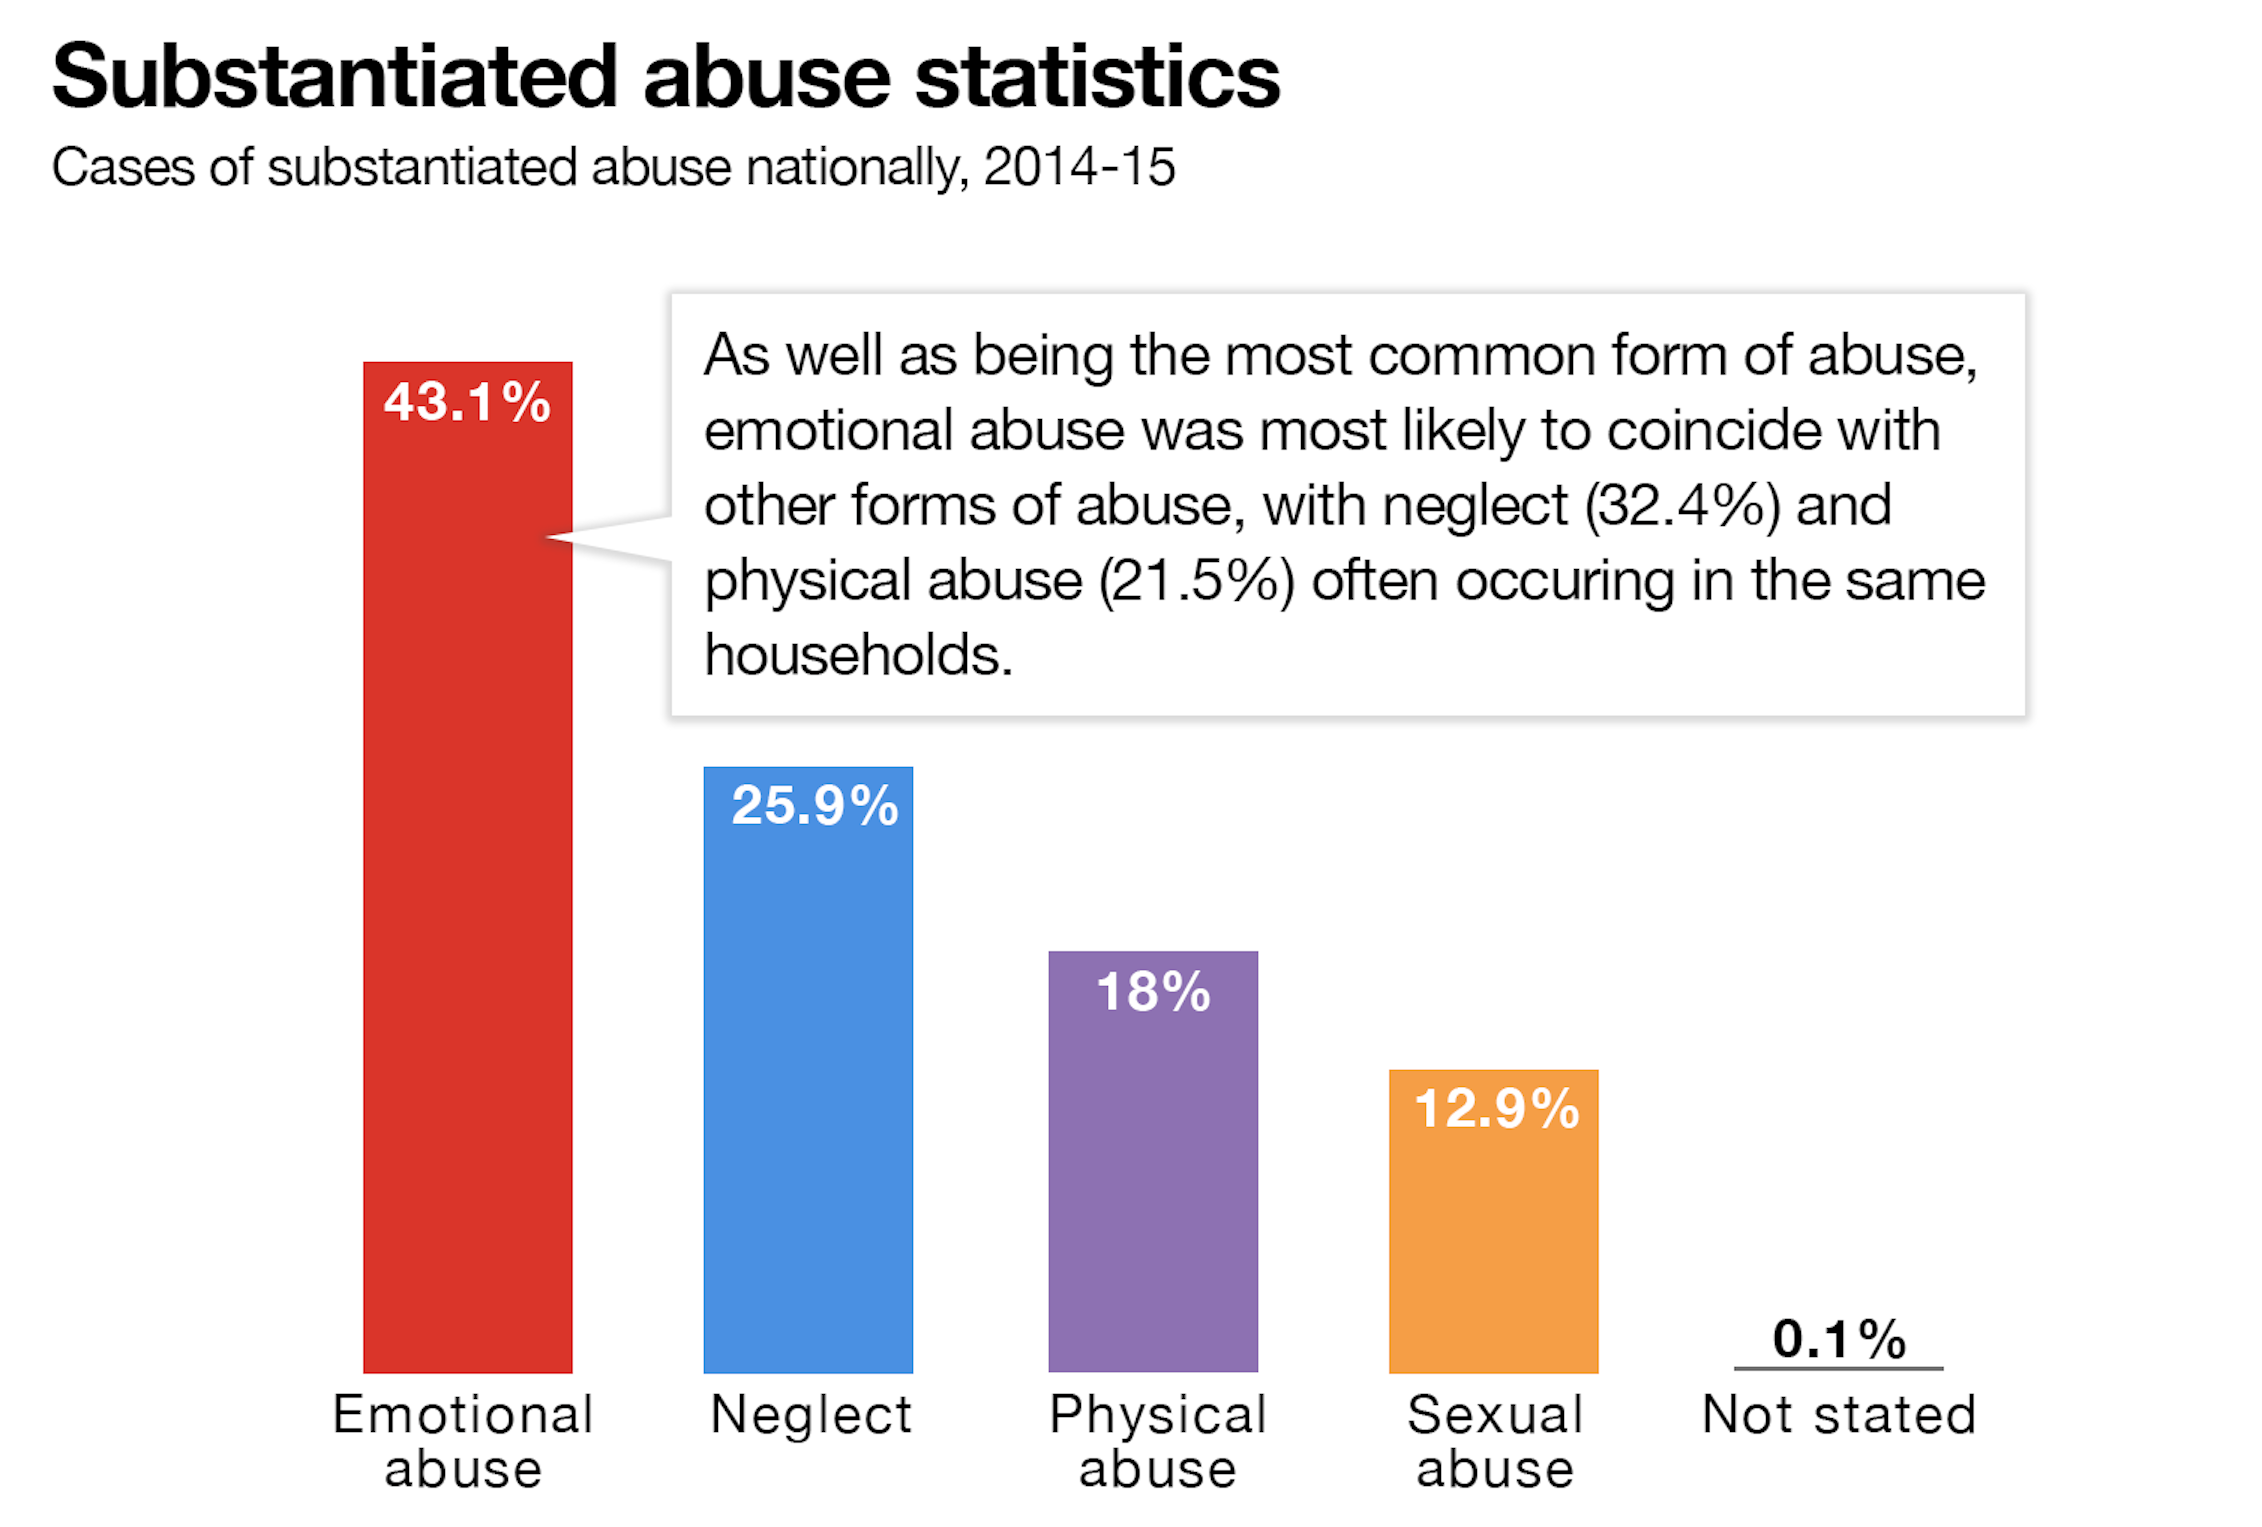 Emotional abuse of children is a growing problem in Australia